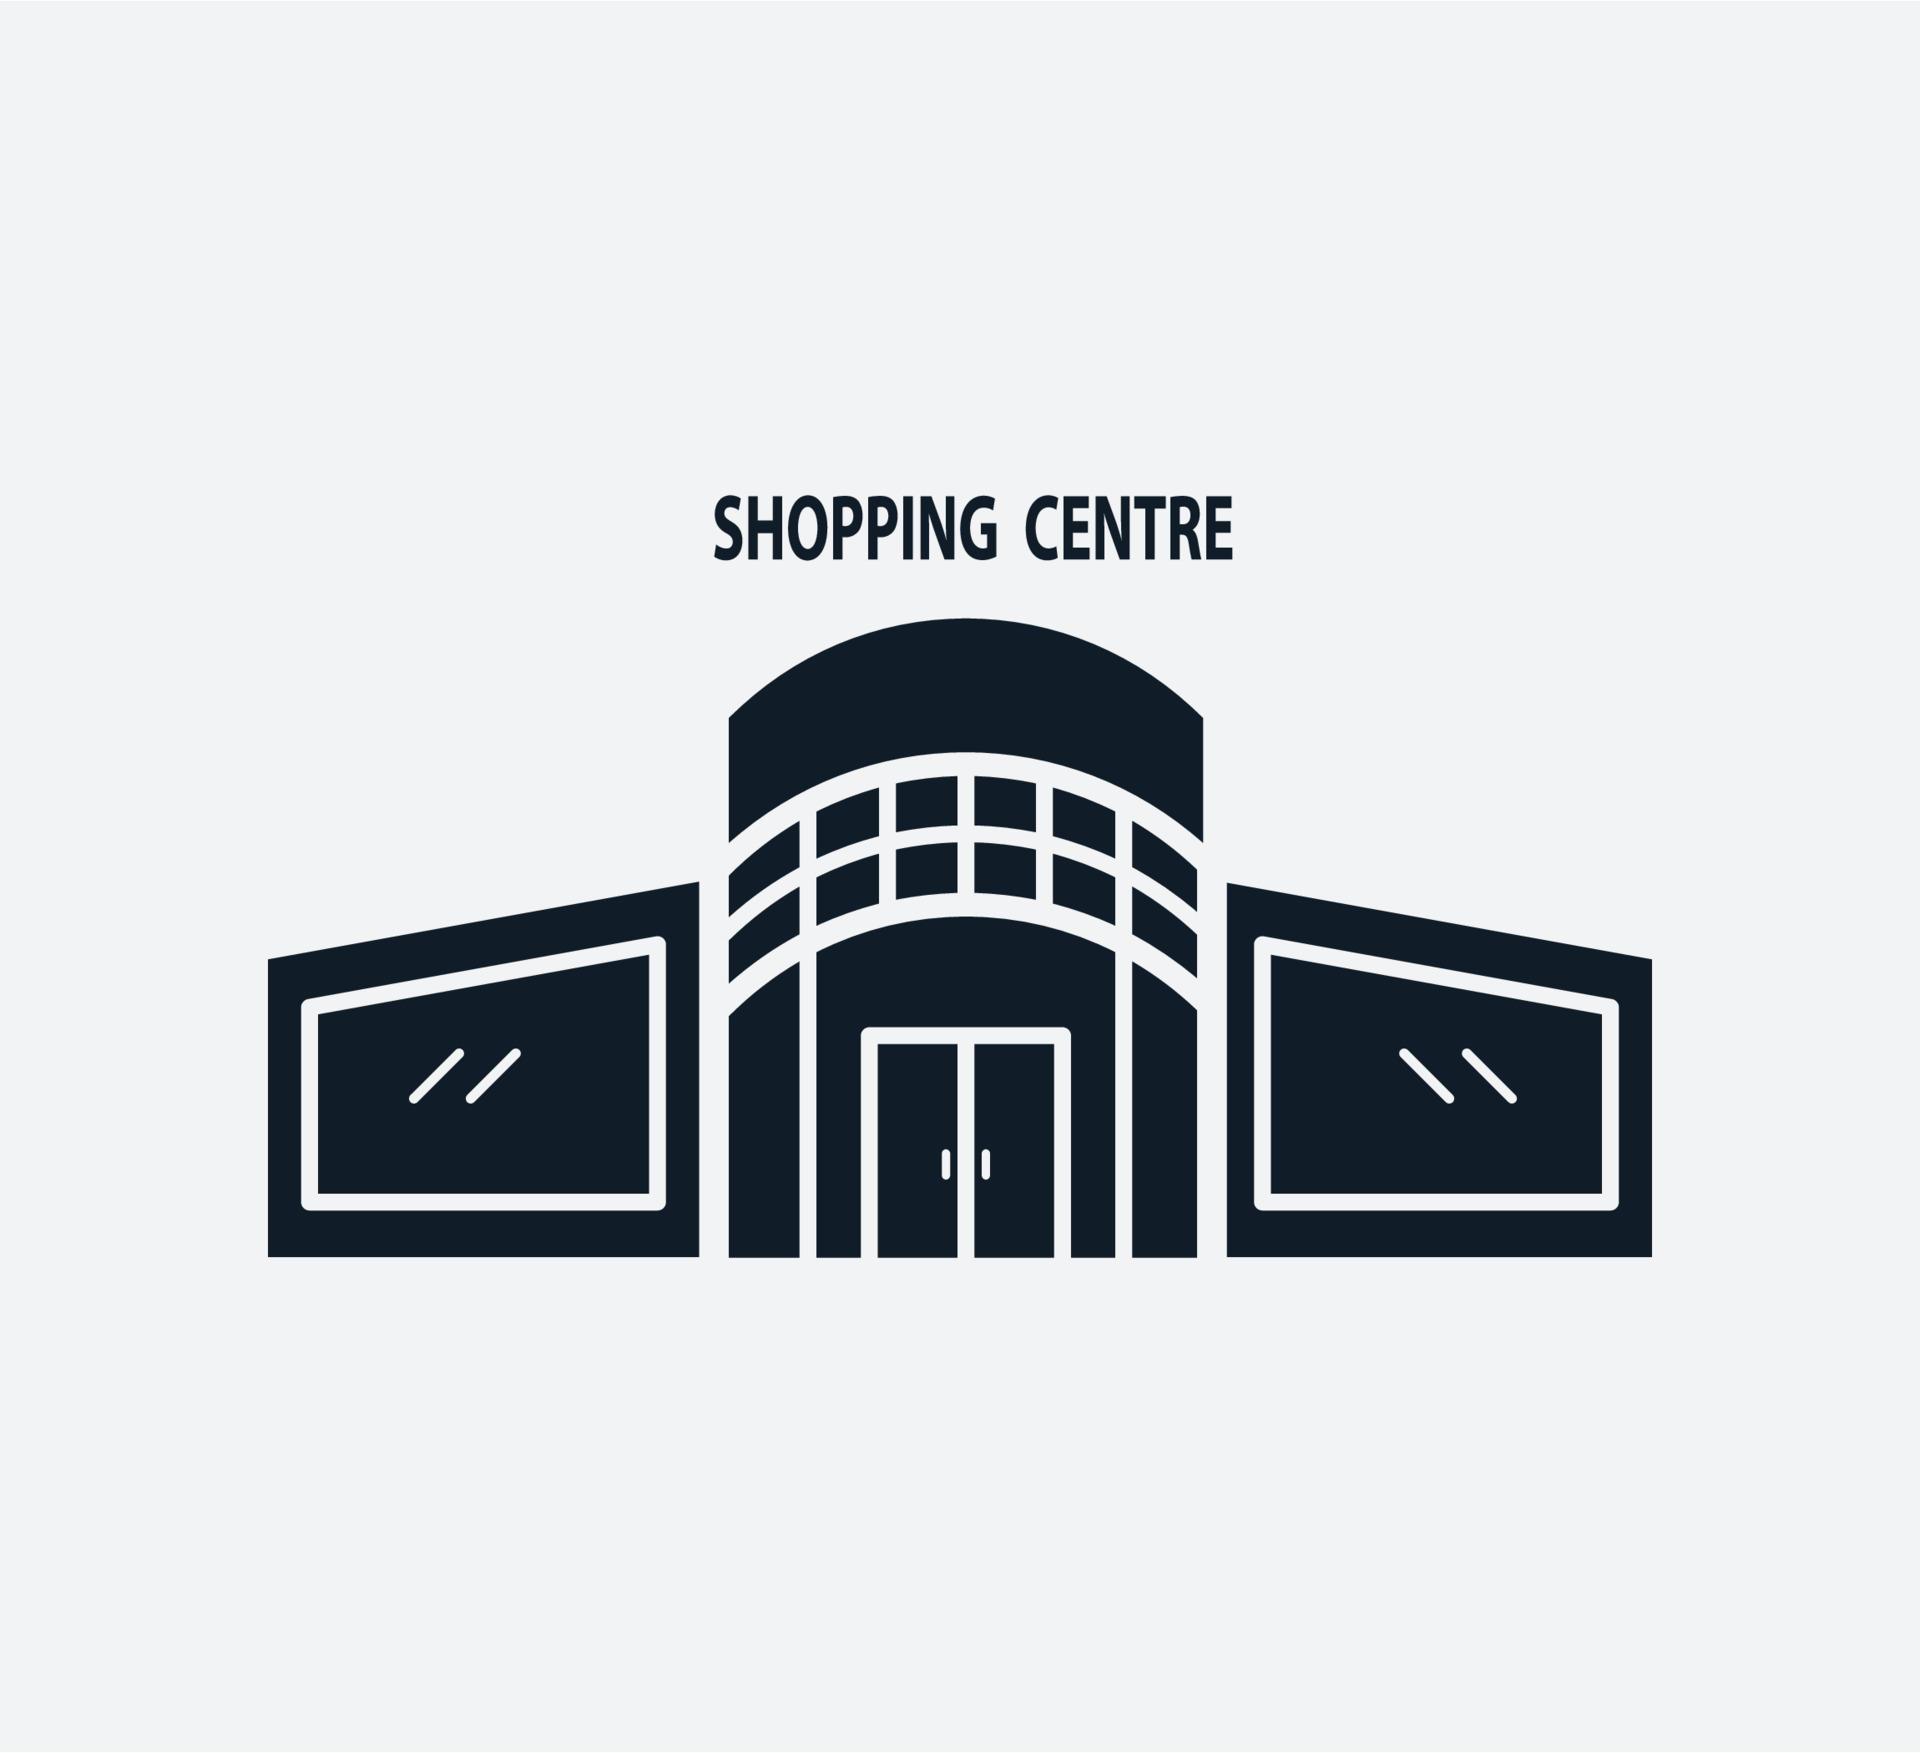 Building mall icon vector logo design template flat style trendy ...